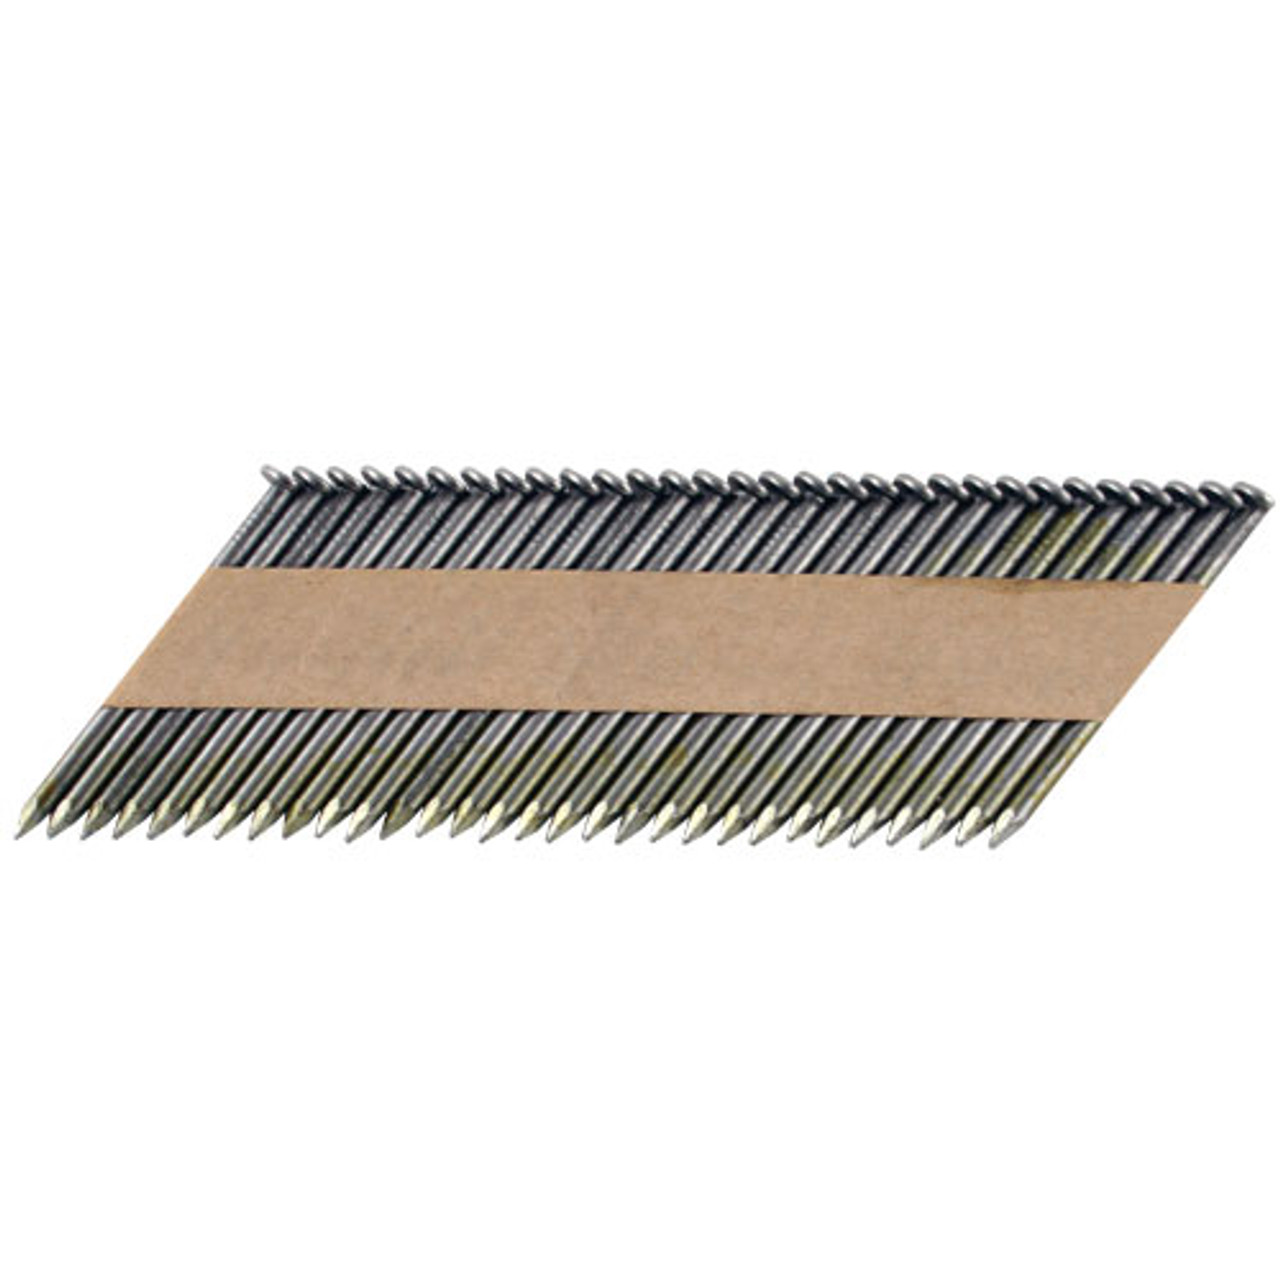 BOSTITCH 35¡ Paper Tape Collated Framing Nails - 3-1/4" X .131", Smooth Shank